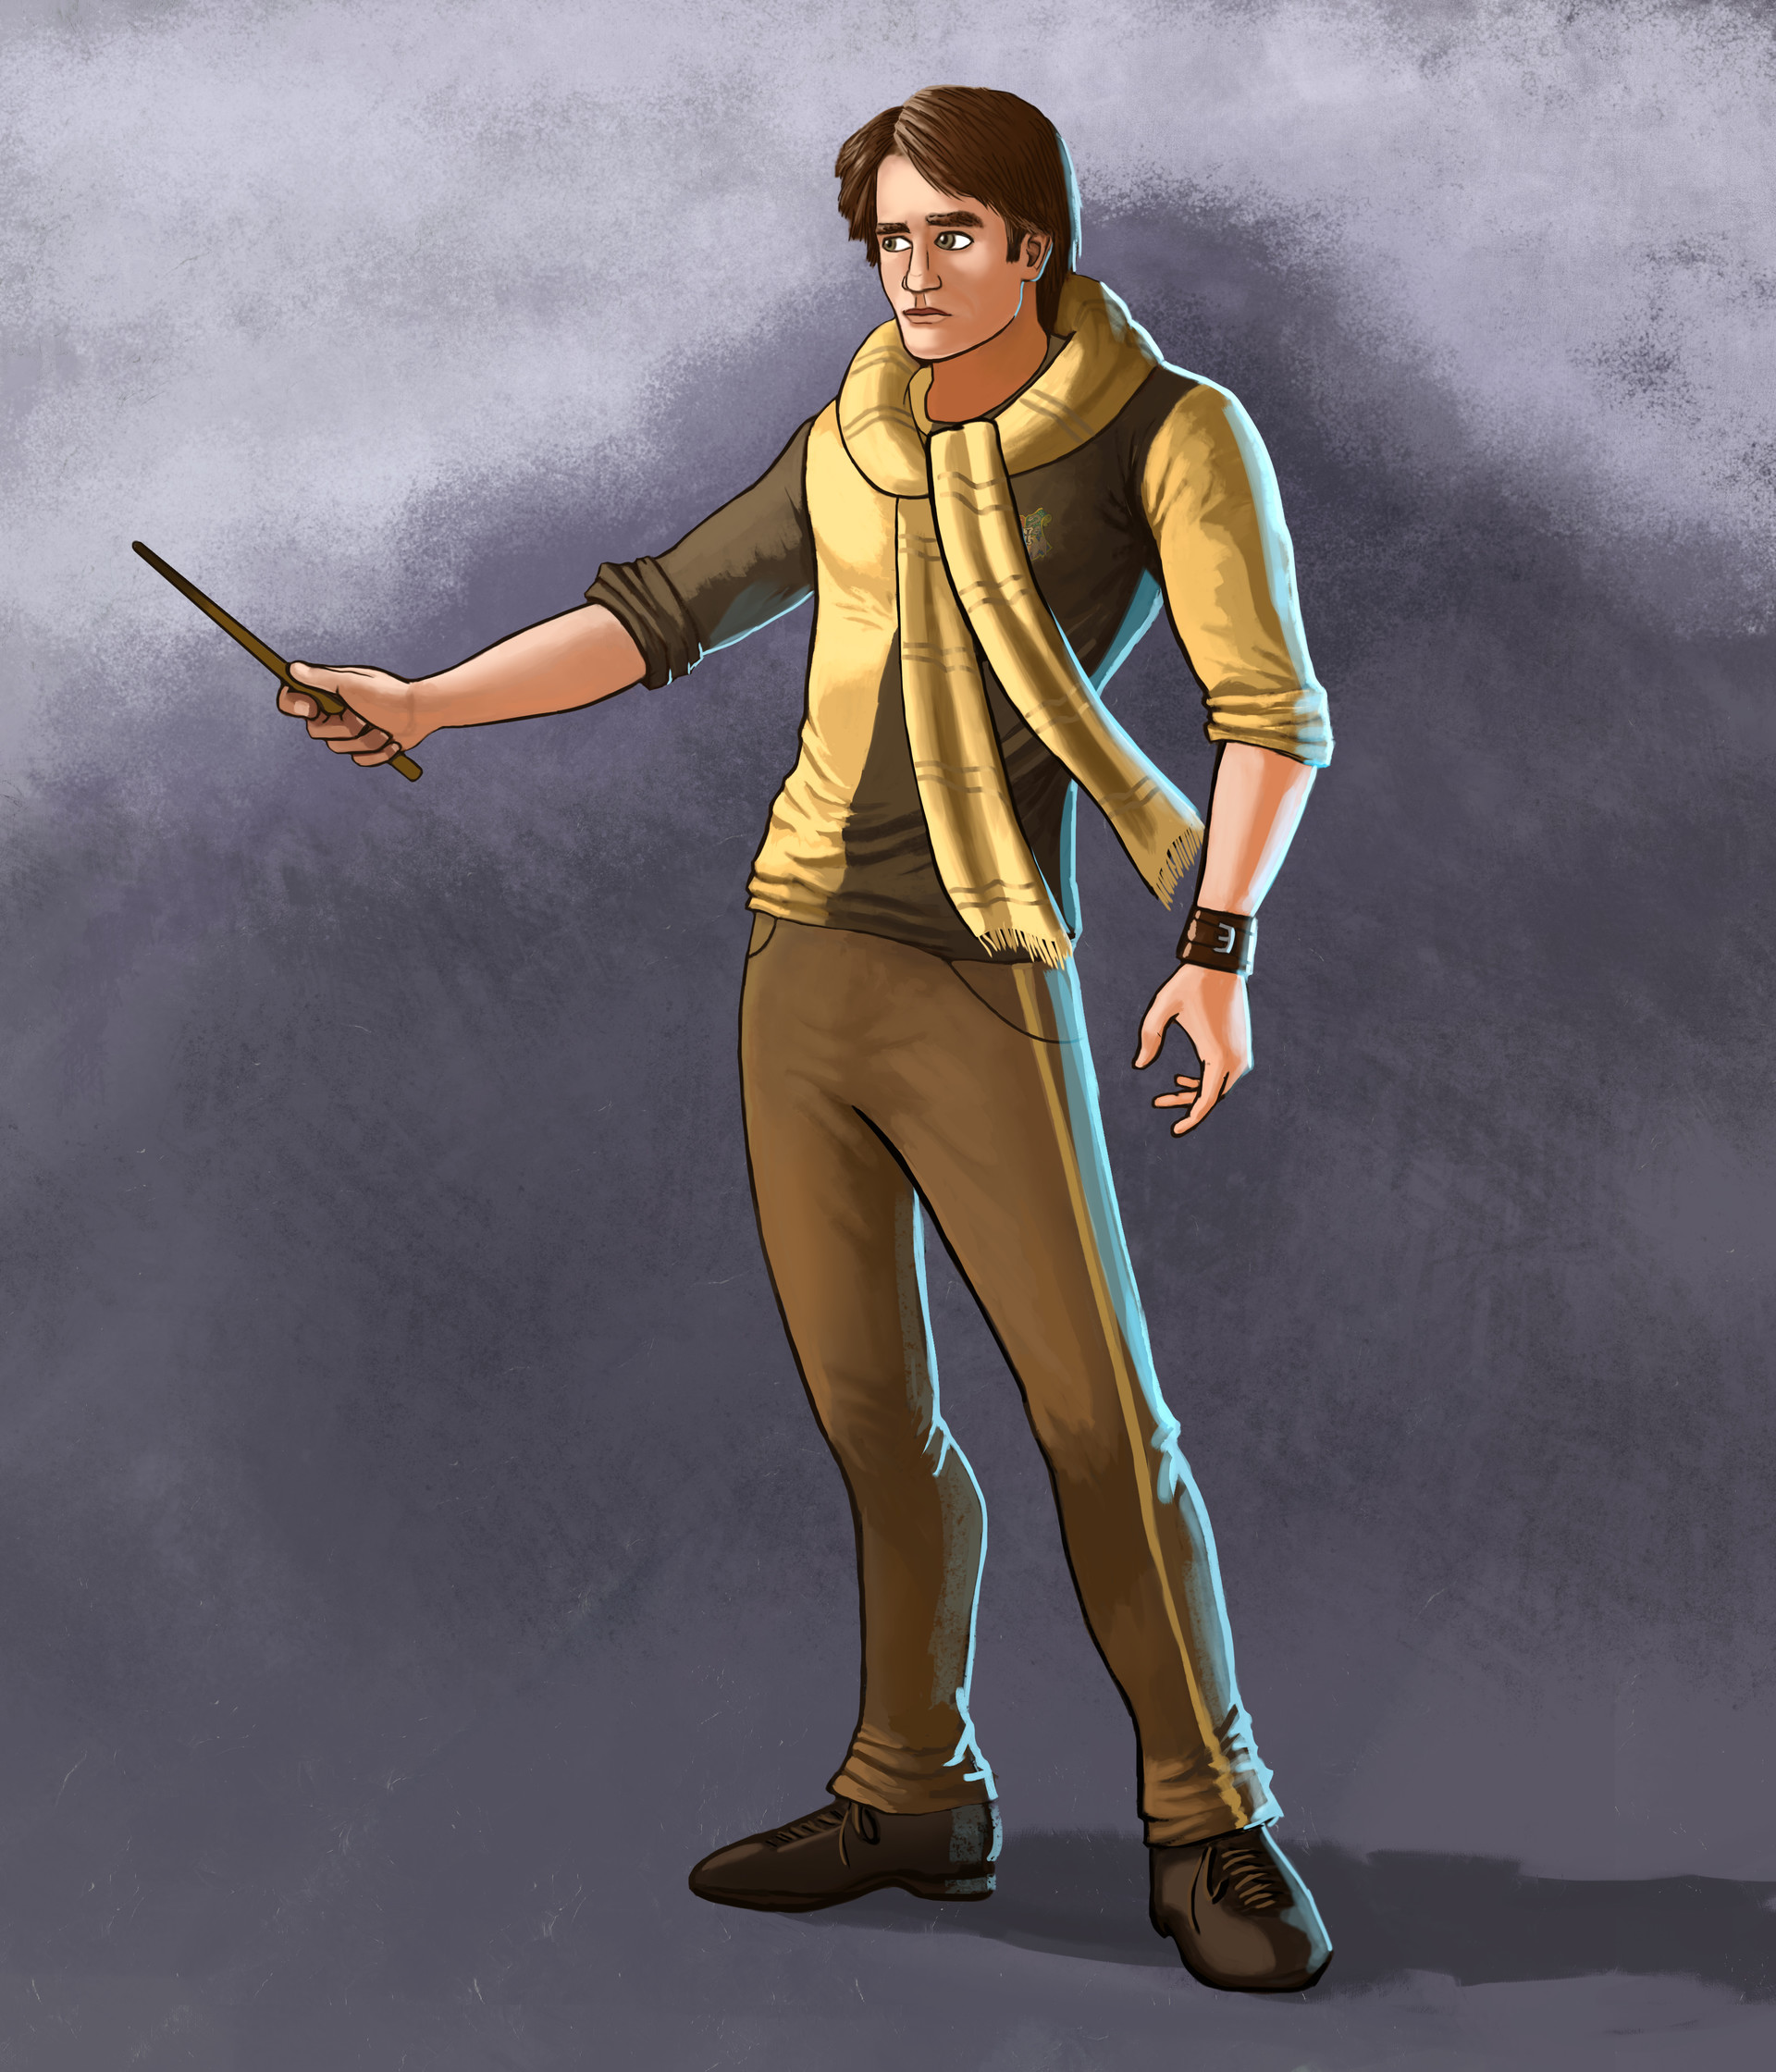 Cedric Diggory Fan Art - Character Redesign for Animation.